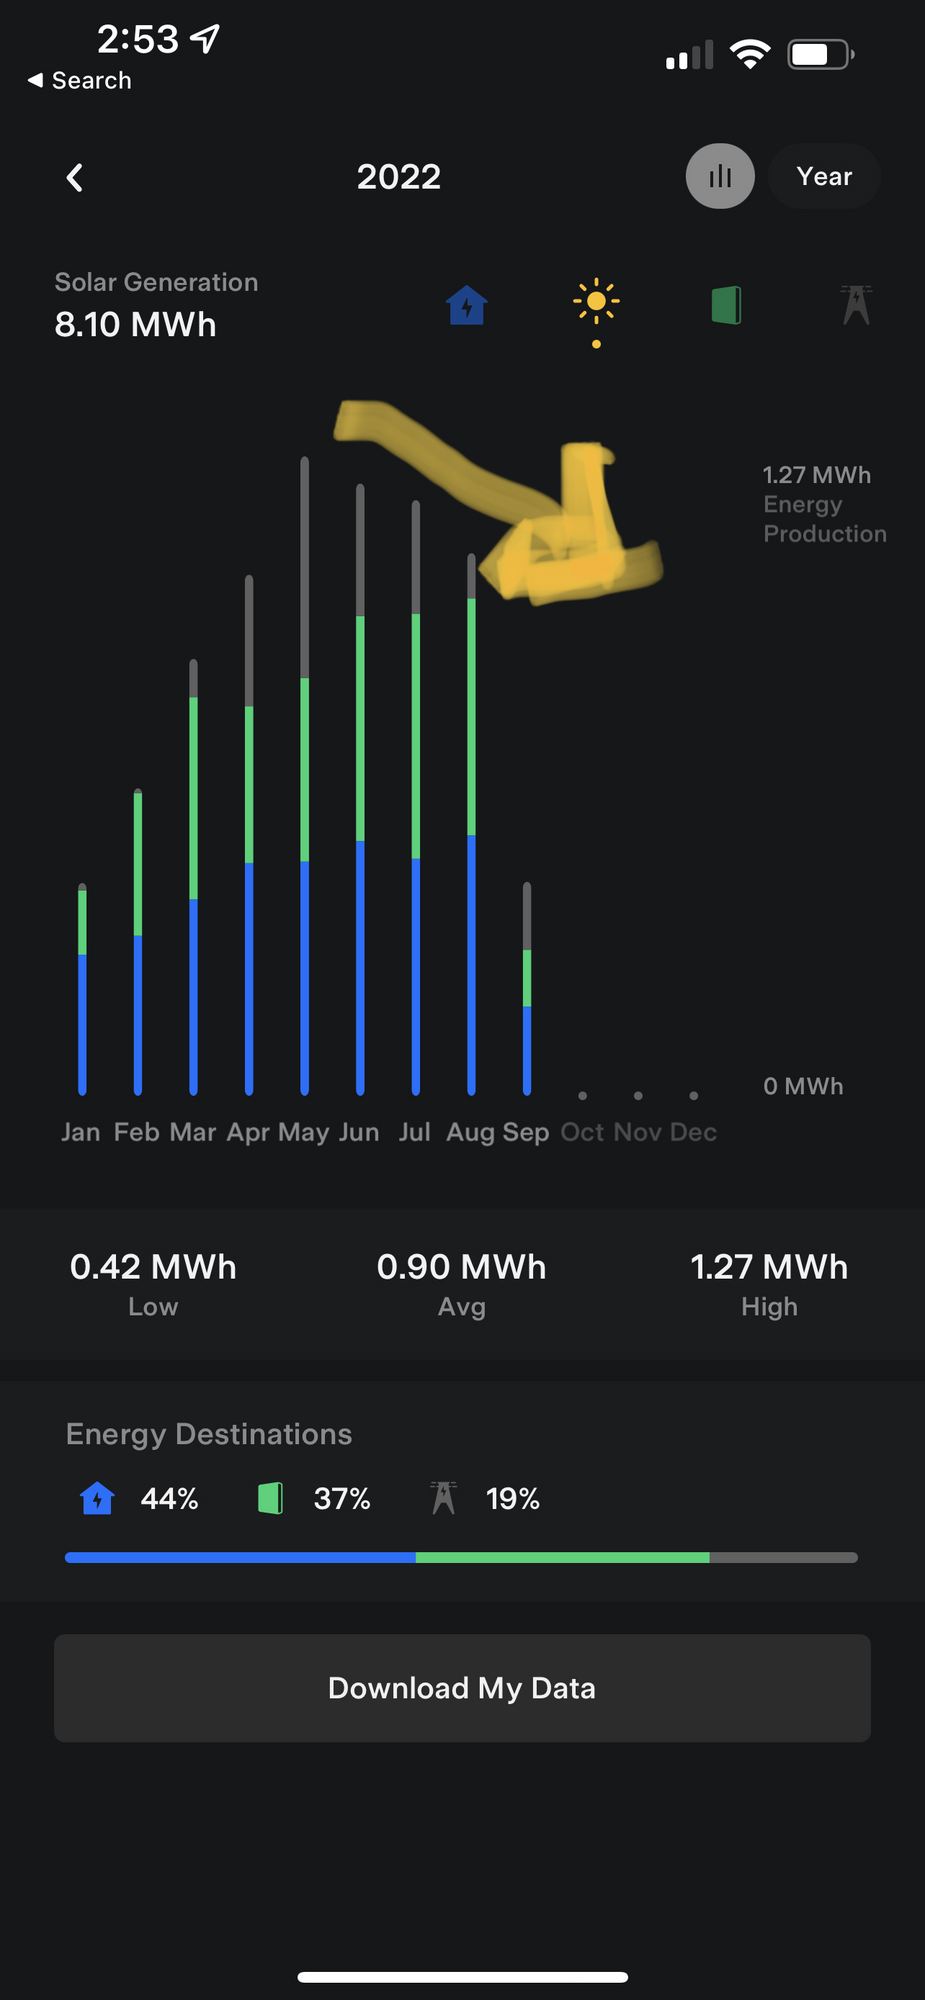 Tesla energy prod drop from may-august.png